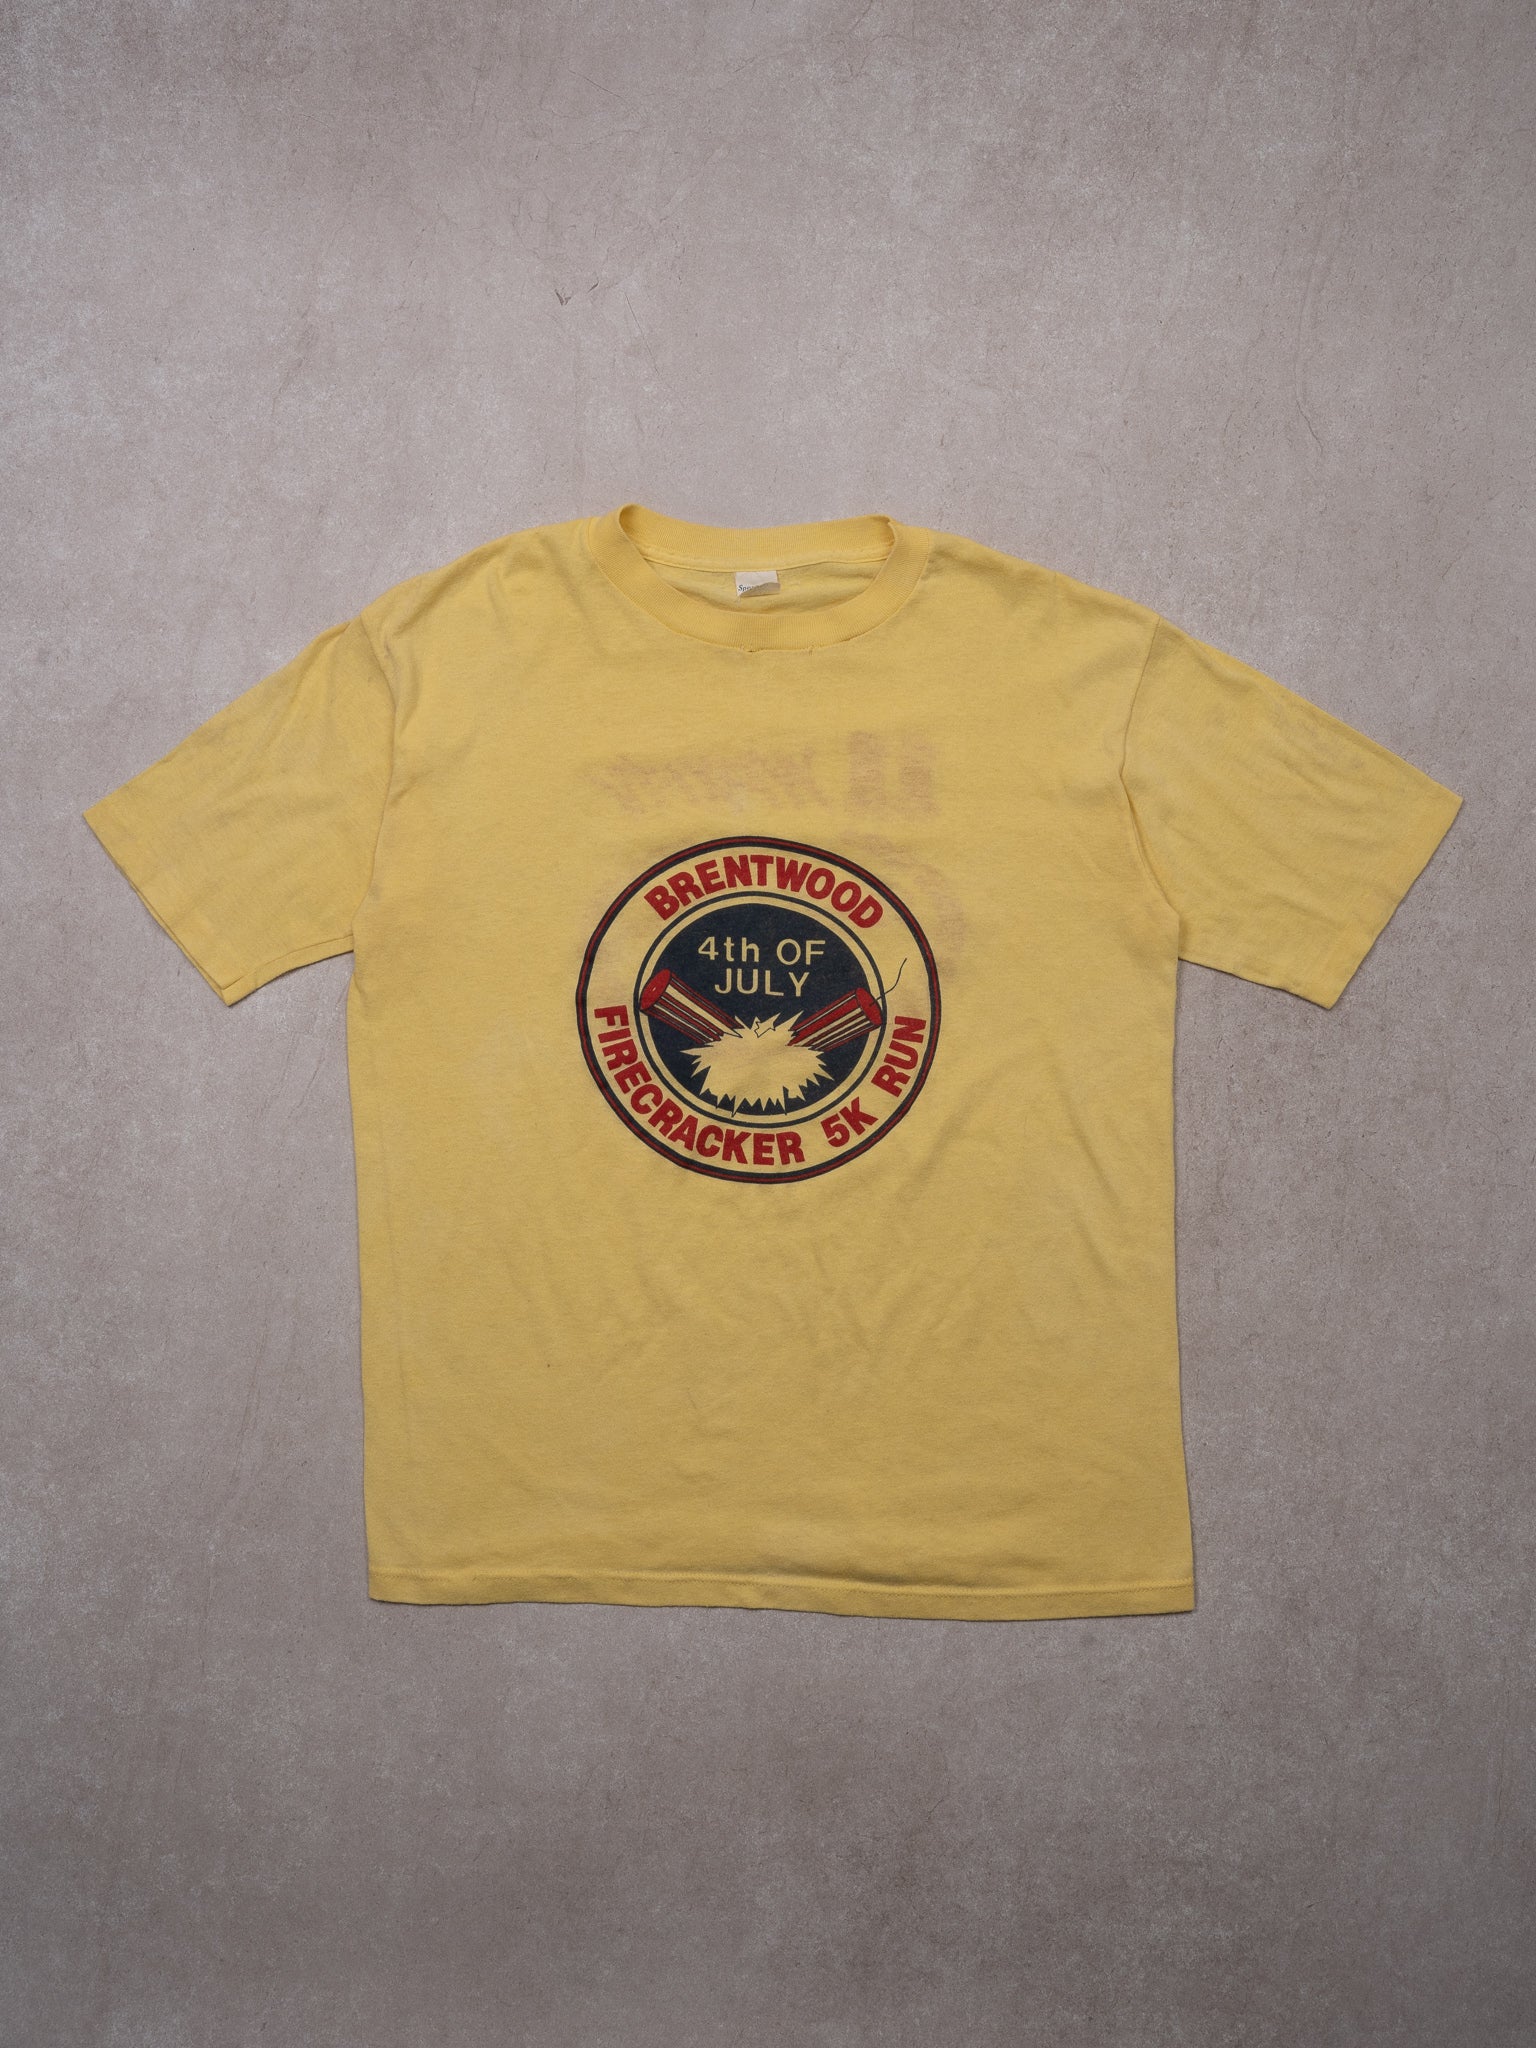 VIntage 80s Yellow Brentwood 4th of July Single Stitch Tee (S/M)